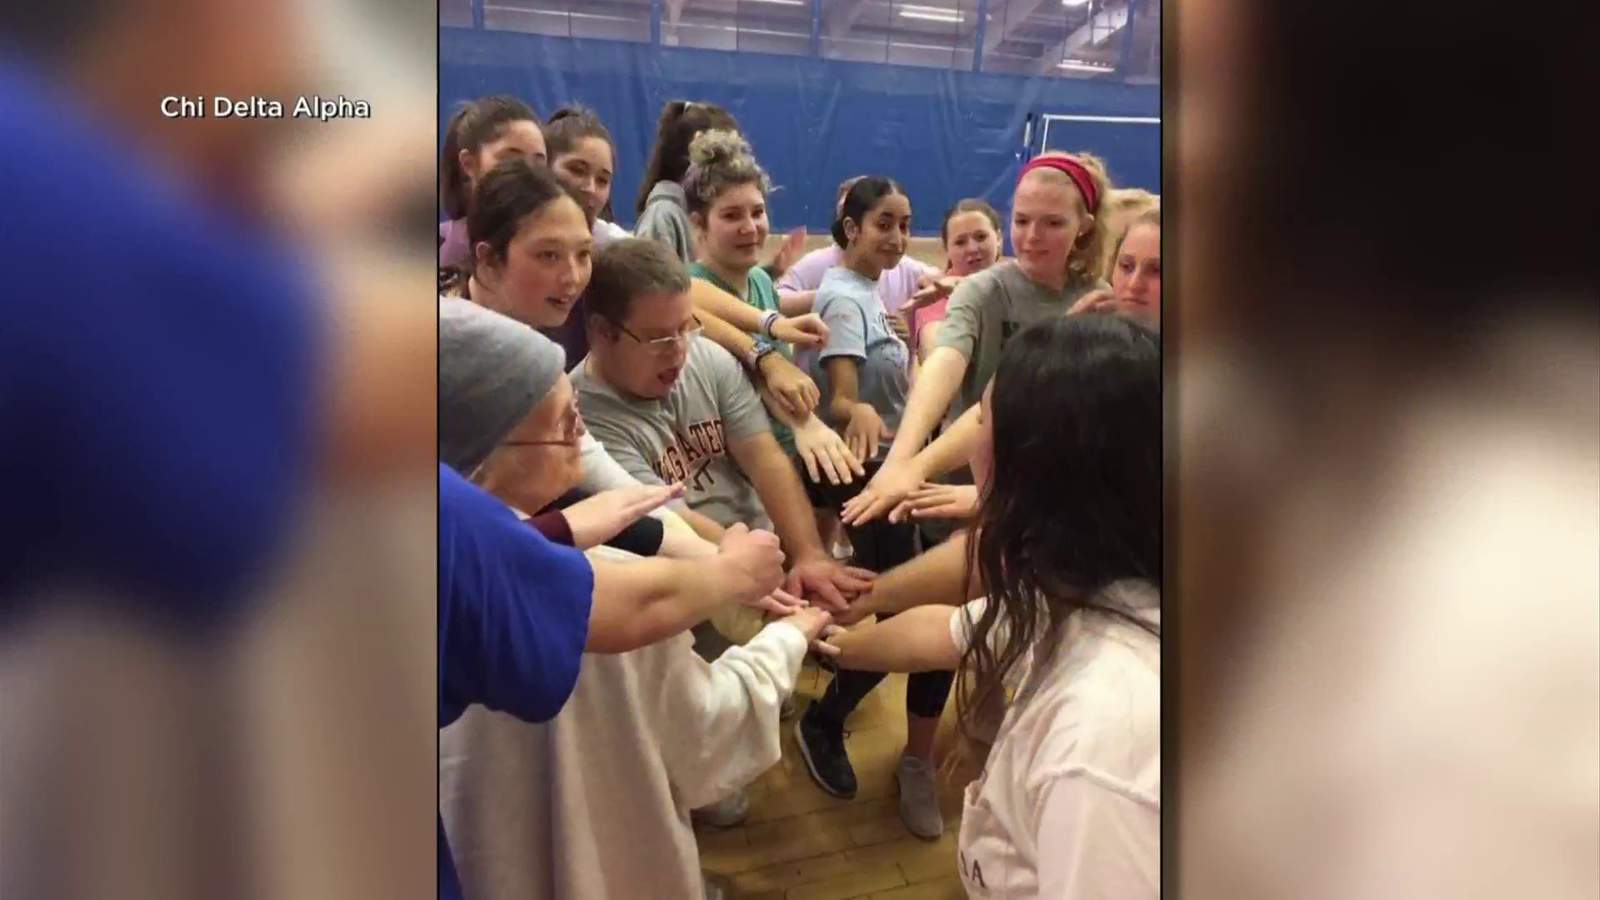 VT Sorority Connects with Special Olympics Athletes During Pandemic